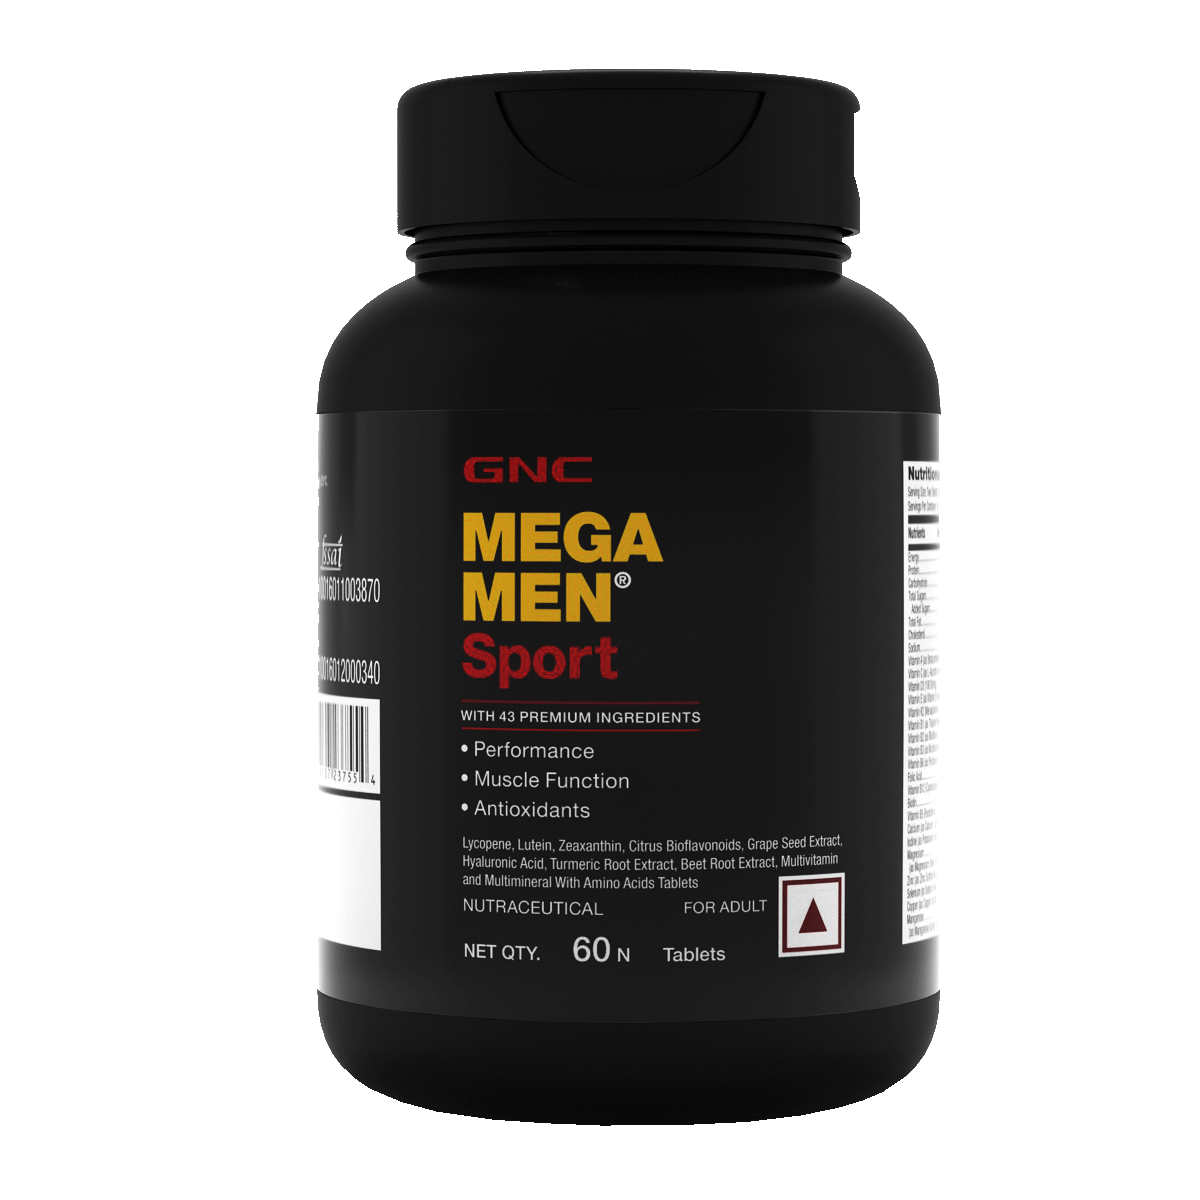 Bulking Combo - For Bulding Muscle Mass | Helps Gain Healthy Weight | Boosts Muscle Recovery | Improves Mental Focus & Energy